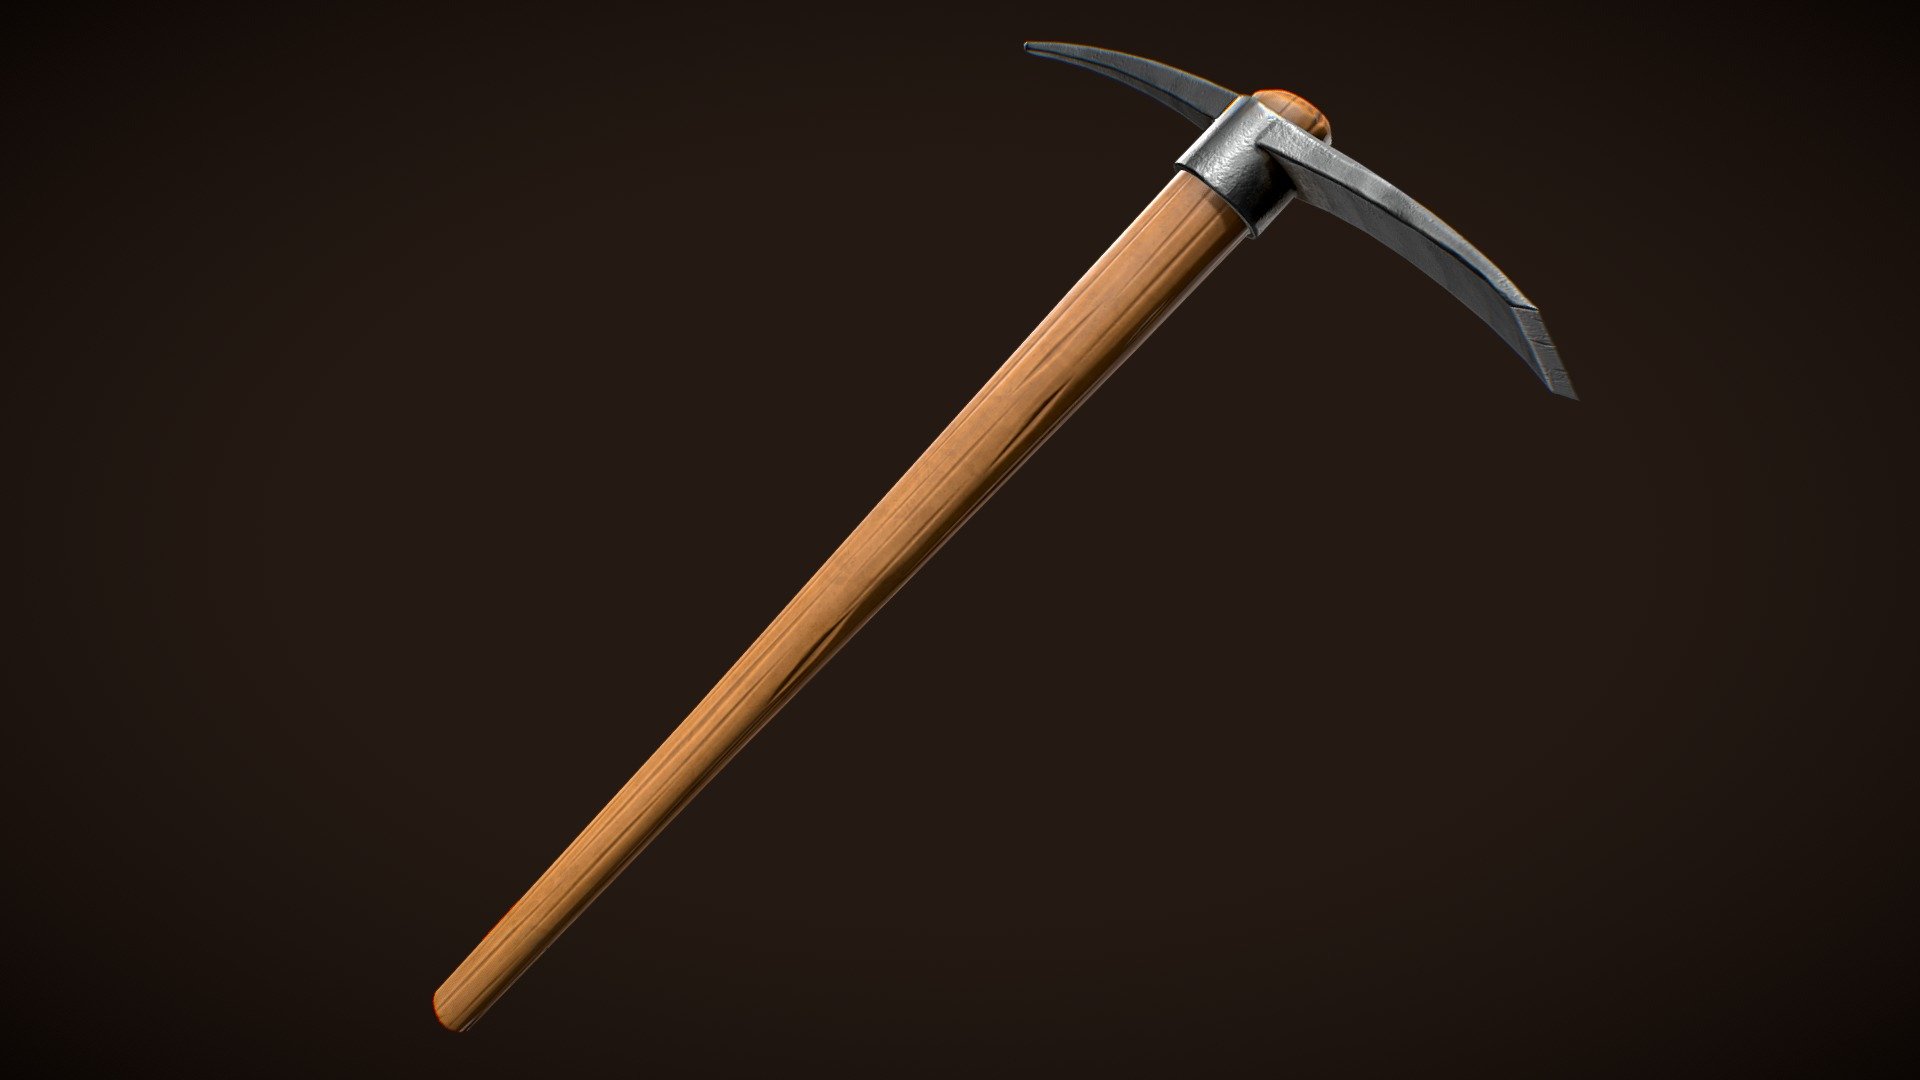 Western Pickaxe, with Stylized PBR Textures. Ready to use in any project.

Are you liked this model? Feel free to take a look on my another models! Here

Features:

.Fbx, .Obj, .Uasset and .Blend files.

Low Poly Mesh game-ready.

Real-World Scale (centimeters).

Unreal Project: 4.15+

Custom Collision for Unreal Engine 4 (Handmade).

Tris Count: 794.

Number of Textures:5

Number of Textures (UE4): 3

PBR Textures (2048x2048) (PNG).

Type of Textures: Base Color, Roughness, Metallic, Normal Map and Ambient Occlusion (PNG).

Combined RMA texture (Roughness, Metallic and Ambient Occlusion) for Unreal Engine (PNG) 3d model